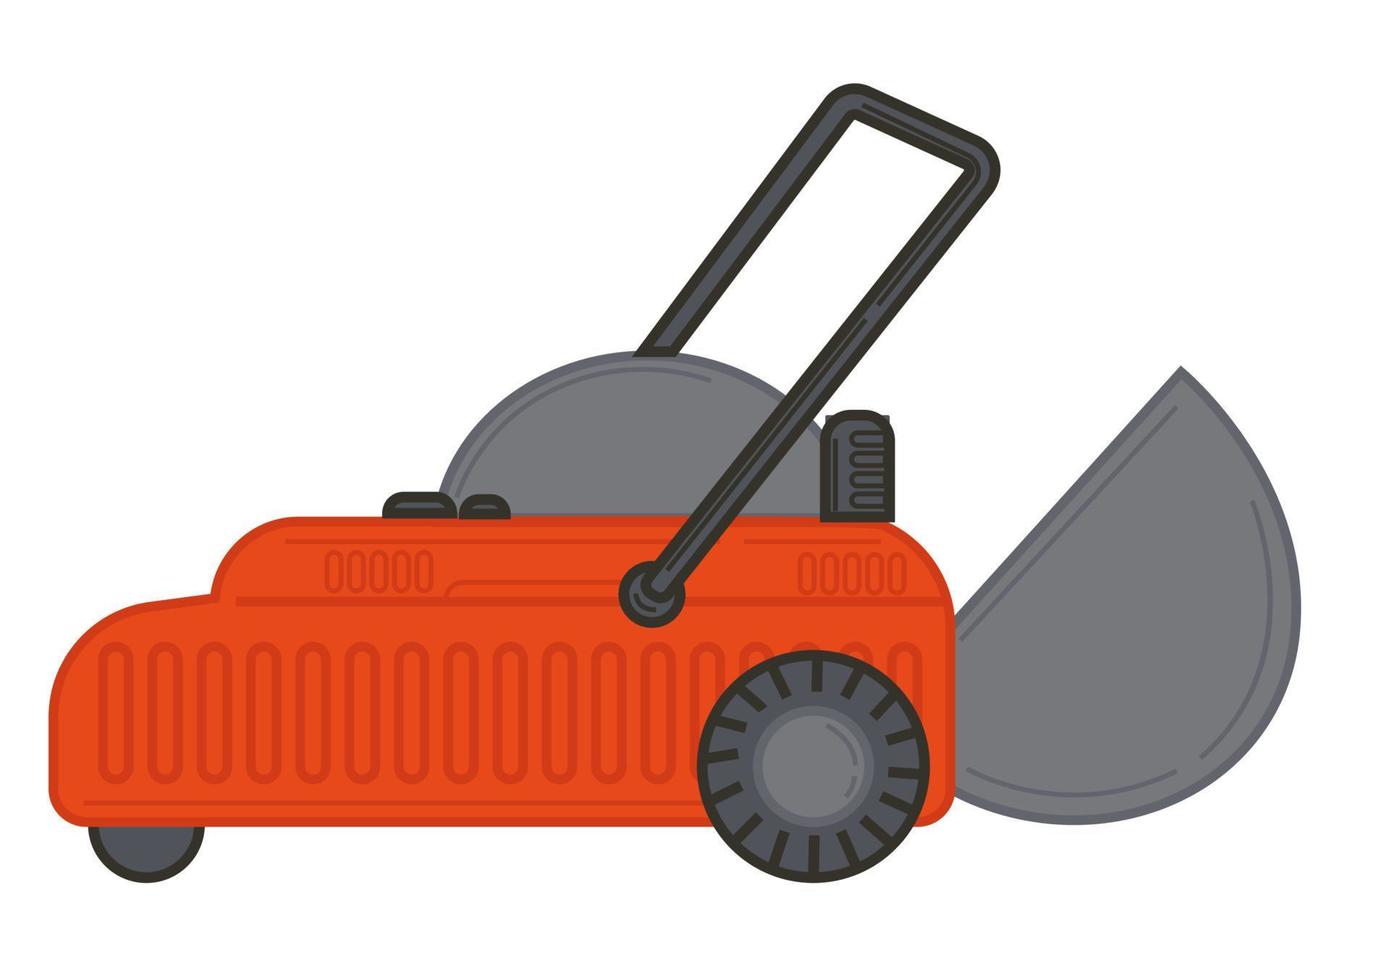 Lawnmower for cutting glass on lawn, household chores vector